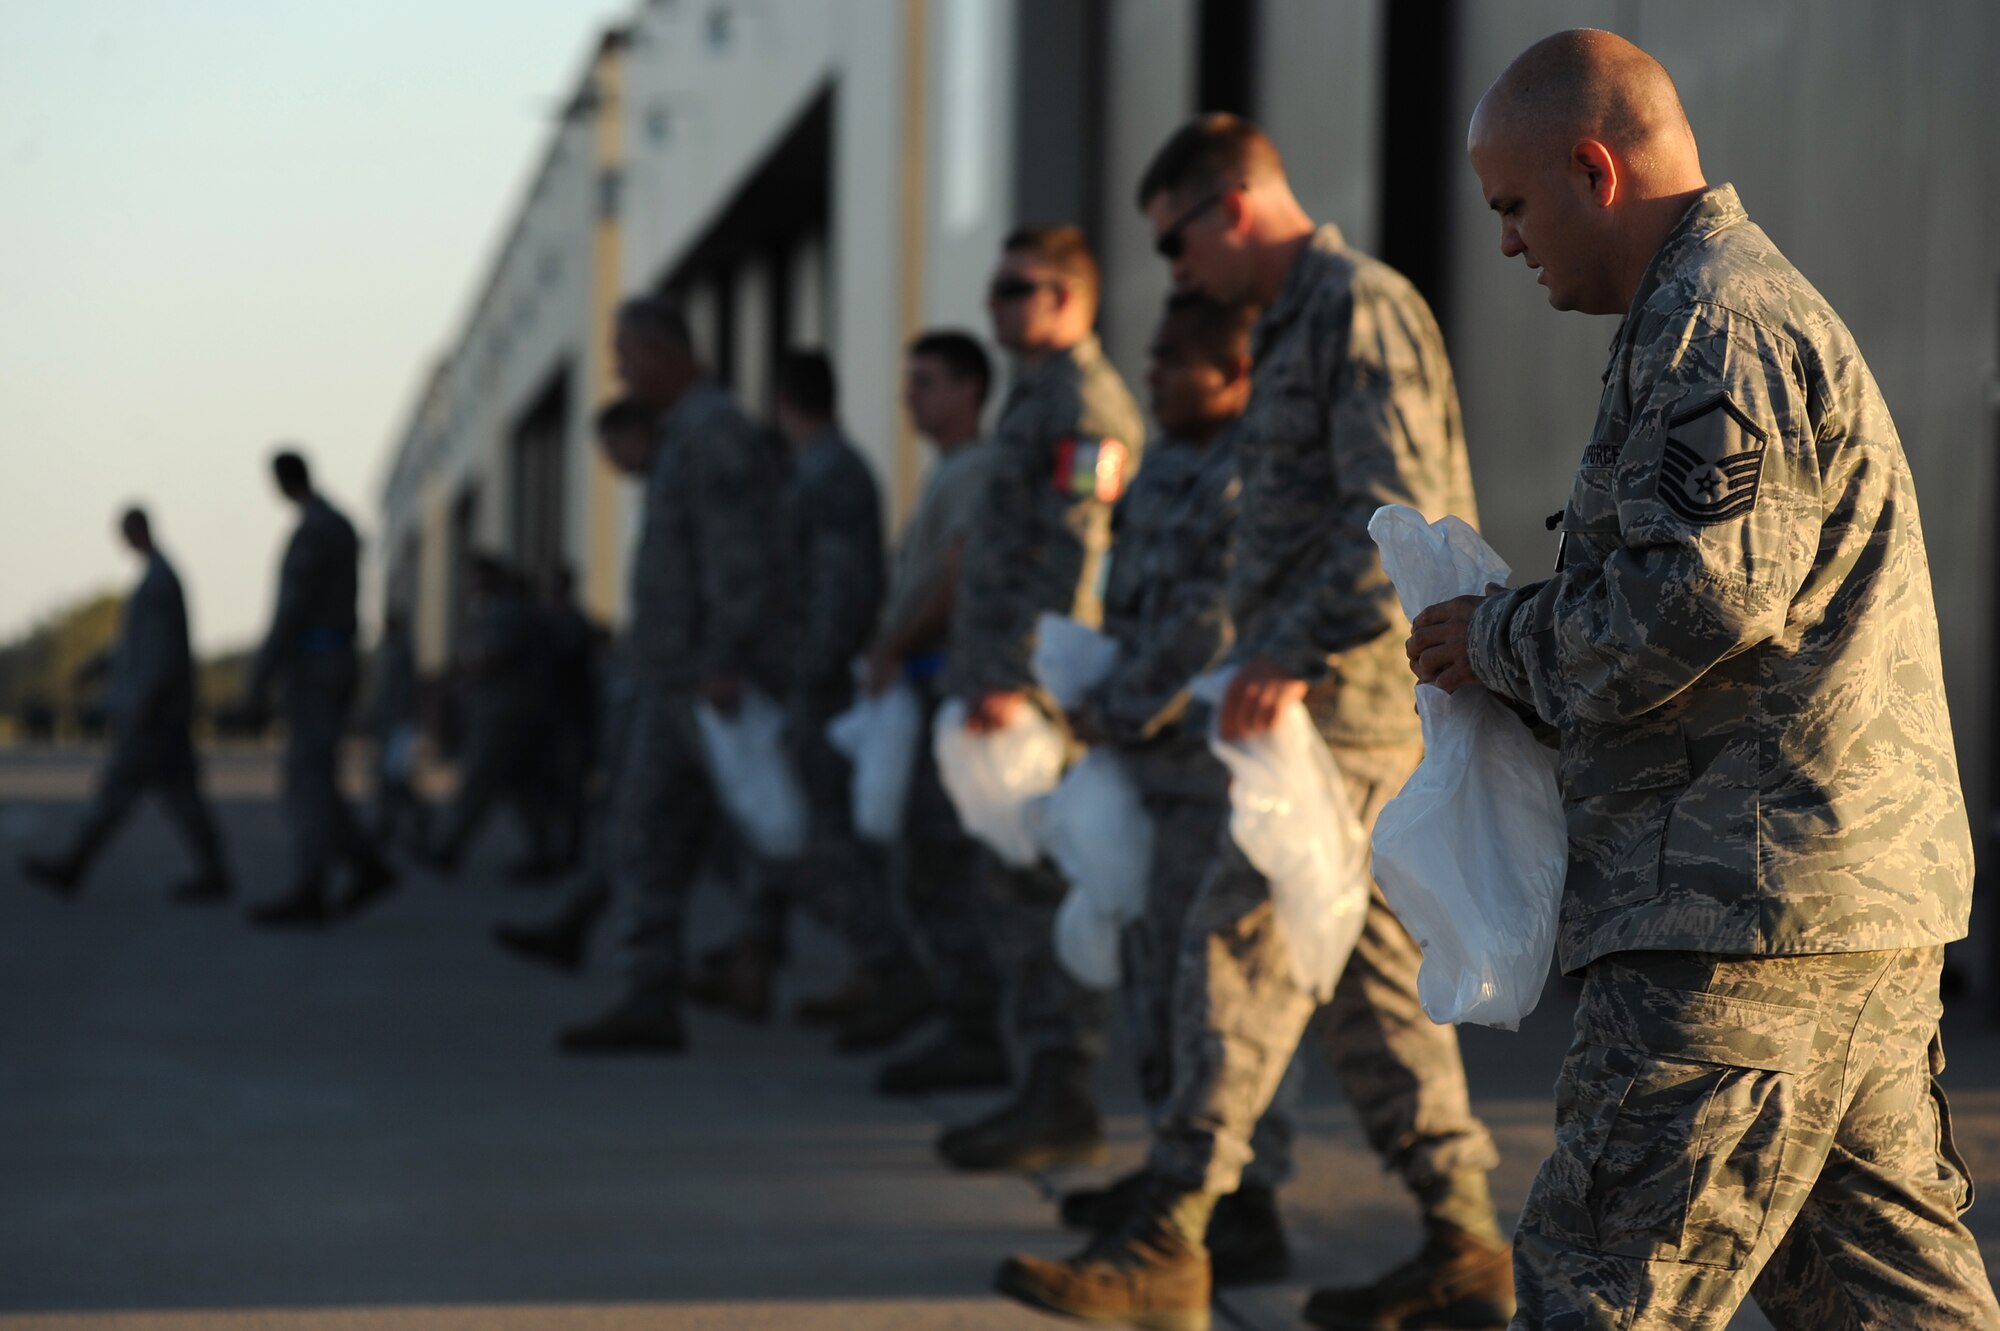 WHITEMAN AIR FORCE BASE, Mo. -- Maintainers and crew chiefs with the 509th Maintenance Squadron and 131st Bomb Wing prepare to perform a Foreign Object Debris walk before starting their day, Sept. 28, 2010. FOD mishaps can potentially result in extensive aircraft damage, ultimately hindering the Air Force's flying mission. To counter such events, crew chiefs, maintainers and other personnel working on the flightline take responsibility for eliminating FOD to keep the aircraft safe and the flying mission soaring. (U.S. Air Force photo by Senior Airman Kenny Holston)(Released) 


